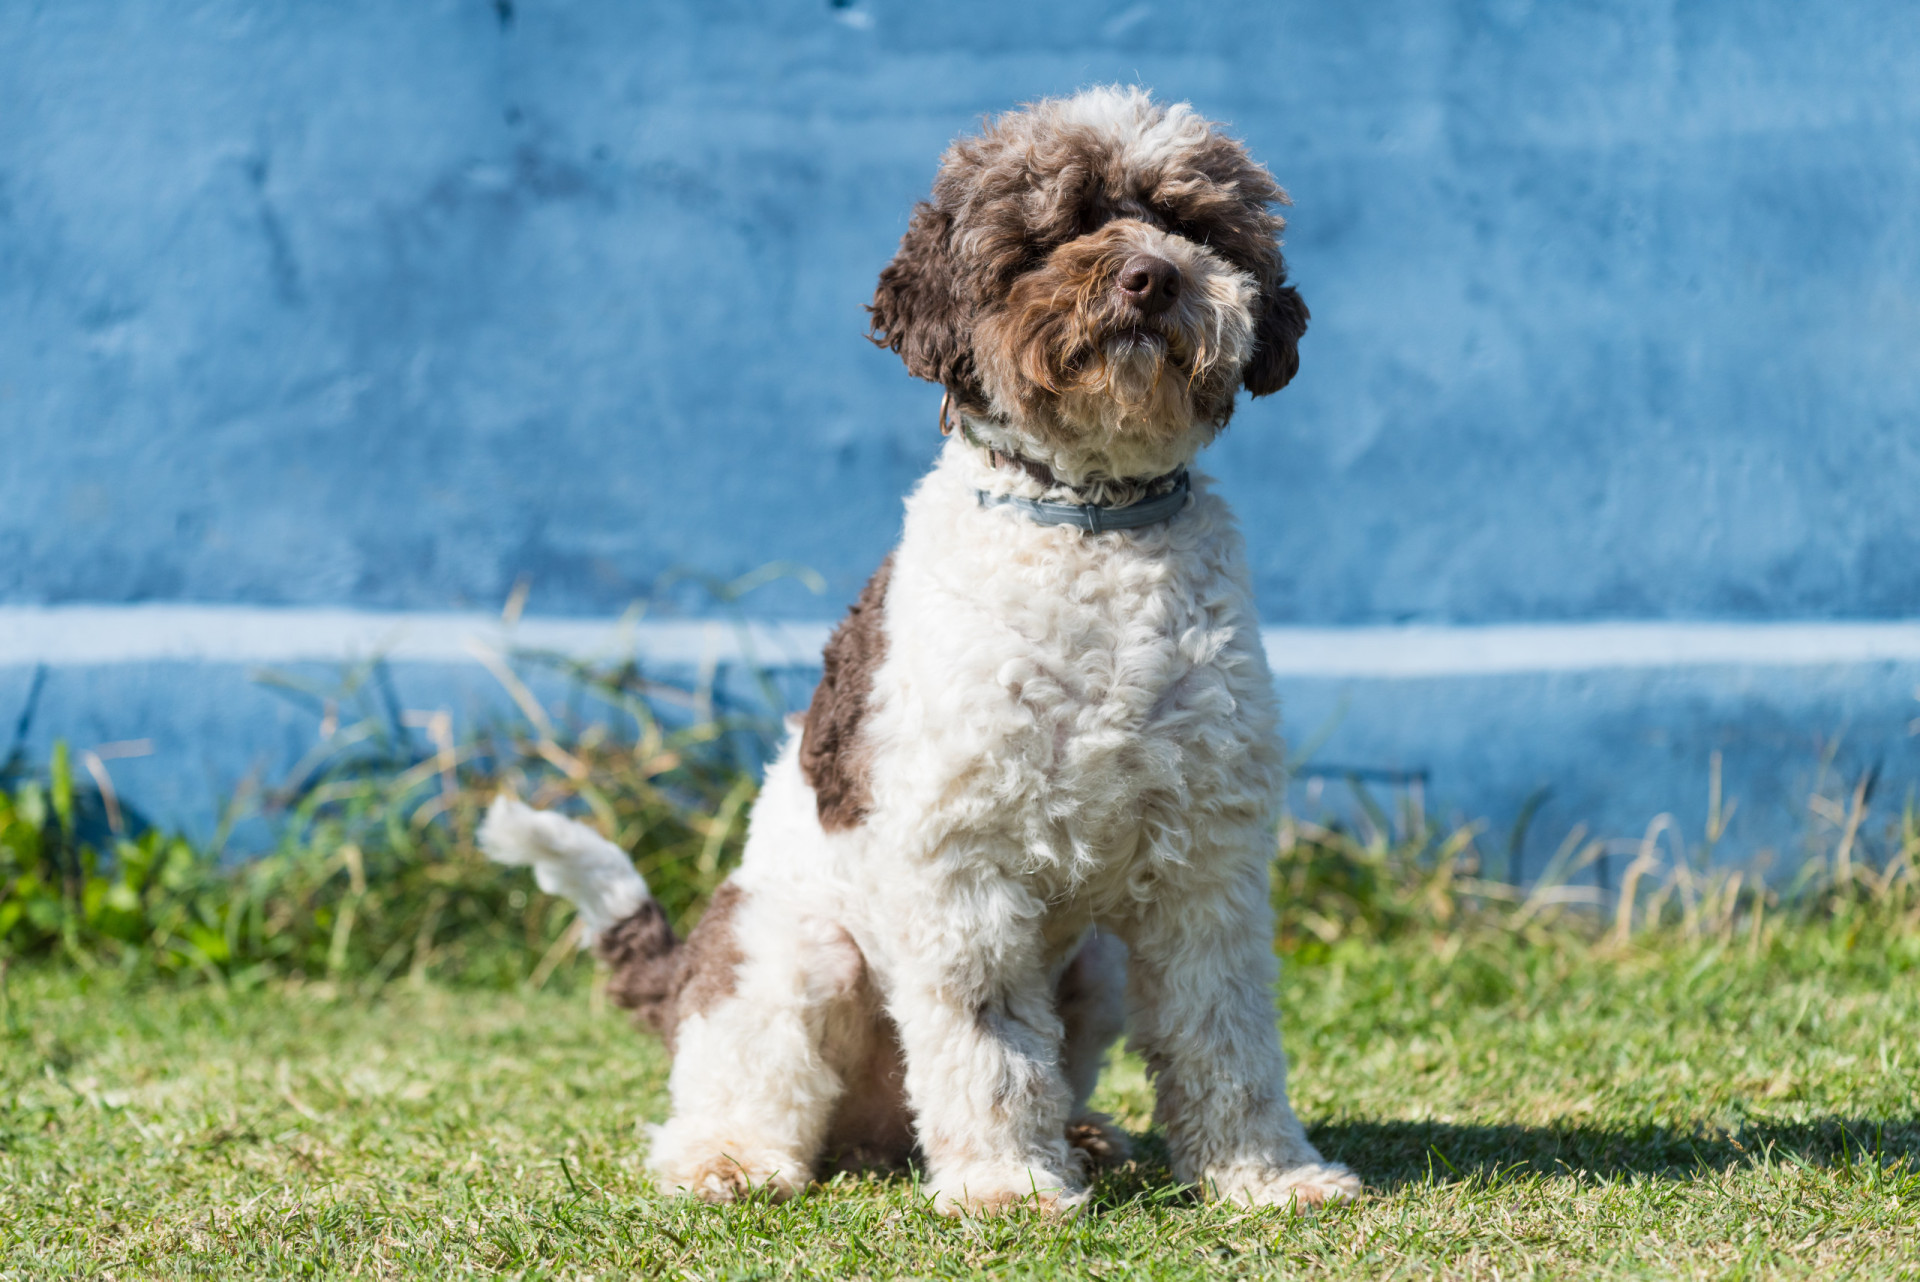 <p>Meaning "lake dog from Romagna," the Lagotto Romagnolo comes from the Romagna sub-region of Italy. With a life expectancy of 16 years, this dog requires a lot of activity.</p><p><a href="https://www.msn.com/en-us/community/channel/vid-7xx8mnucu55yw63we9va2gwr7uihbxwc68fxqp25x6tg4ftibpra?cvid=94631541bc0f4f89bfd59158d696ad7e">Follow us and access great exclusive content every day</a></p>